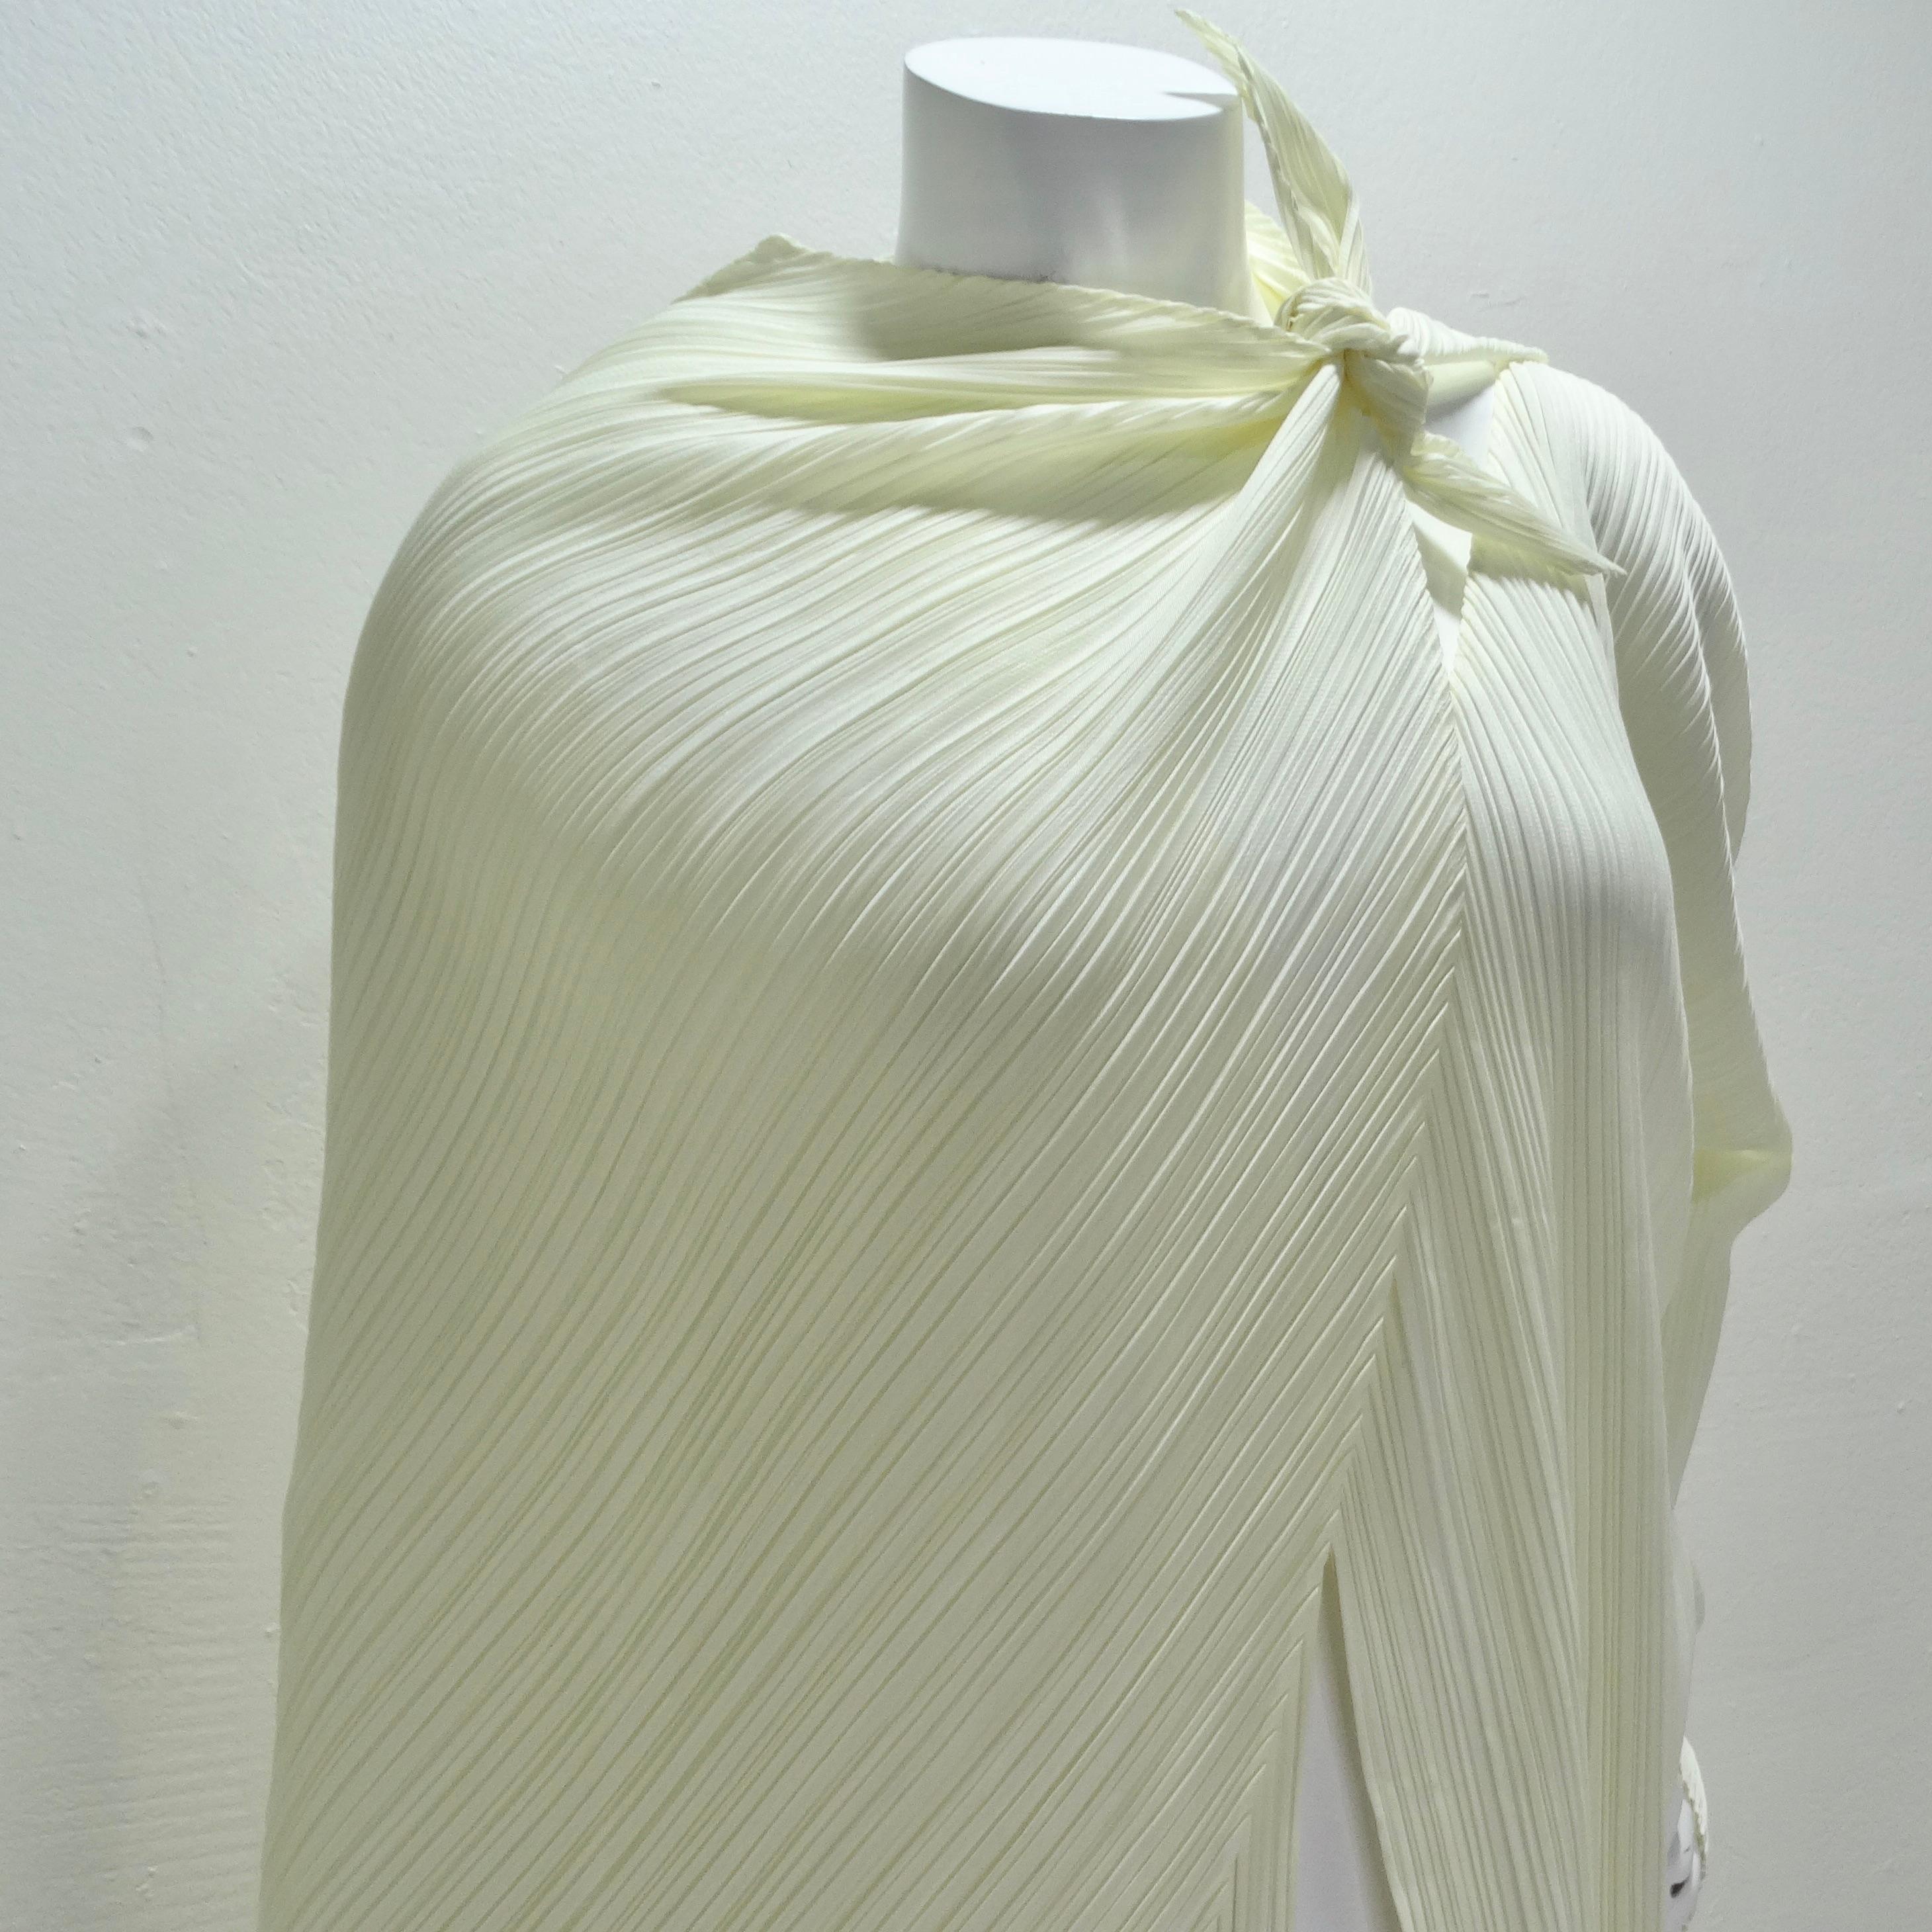 Step into the world of iconic fashion with the Issey Miyake Pleats Please cardigan and shawl set from the 1990s. Crafted in a mesmerizing off-white hue, this set showcases Issey Miyake's signature pleated fabric that gracefully molds to the wearer's